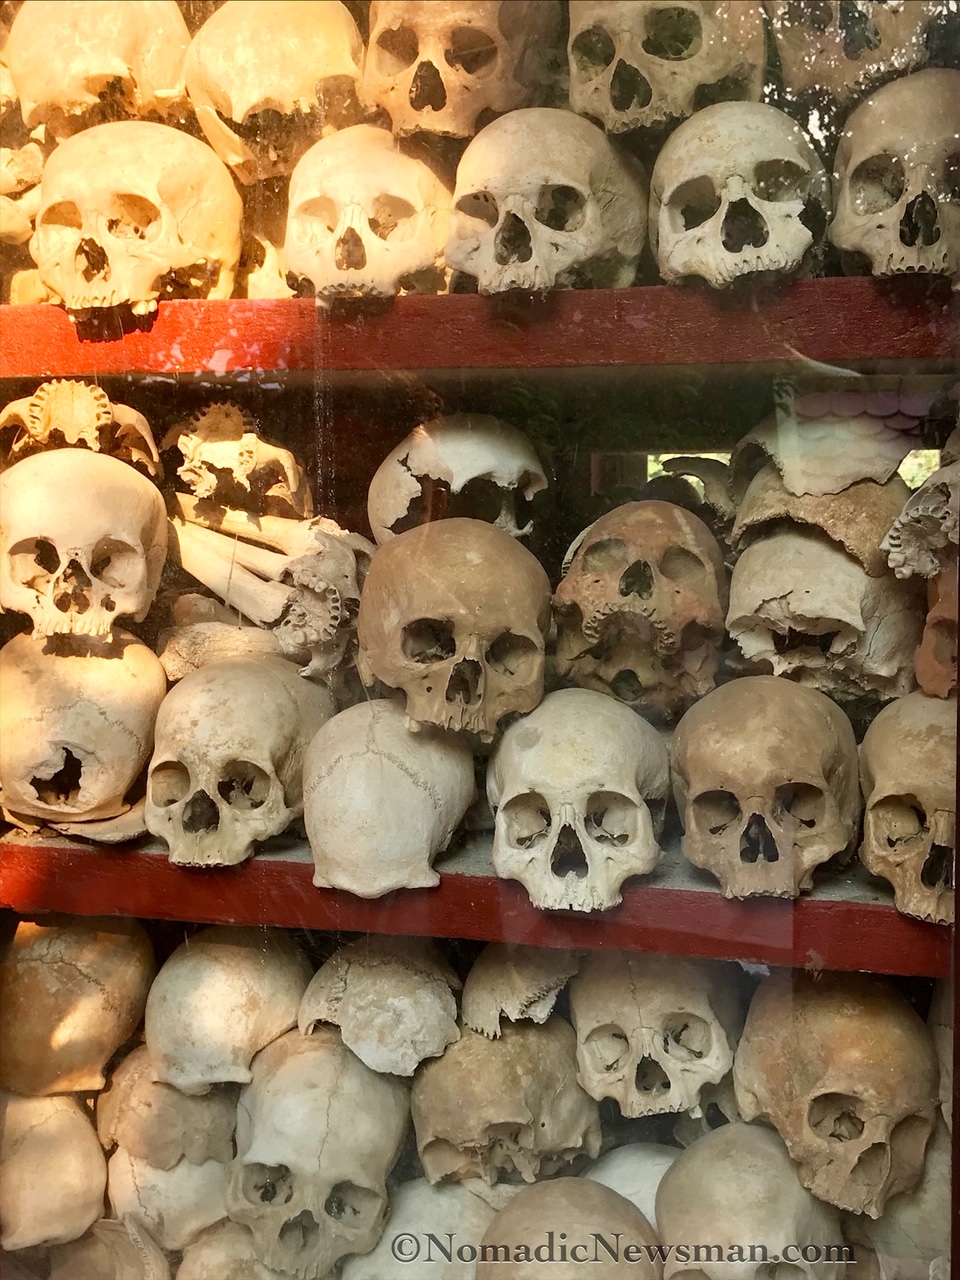 Human remains of the Killing Fields